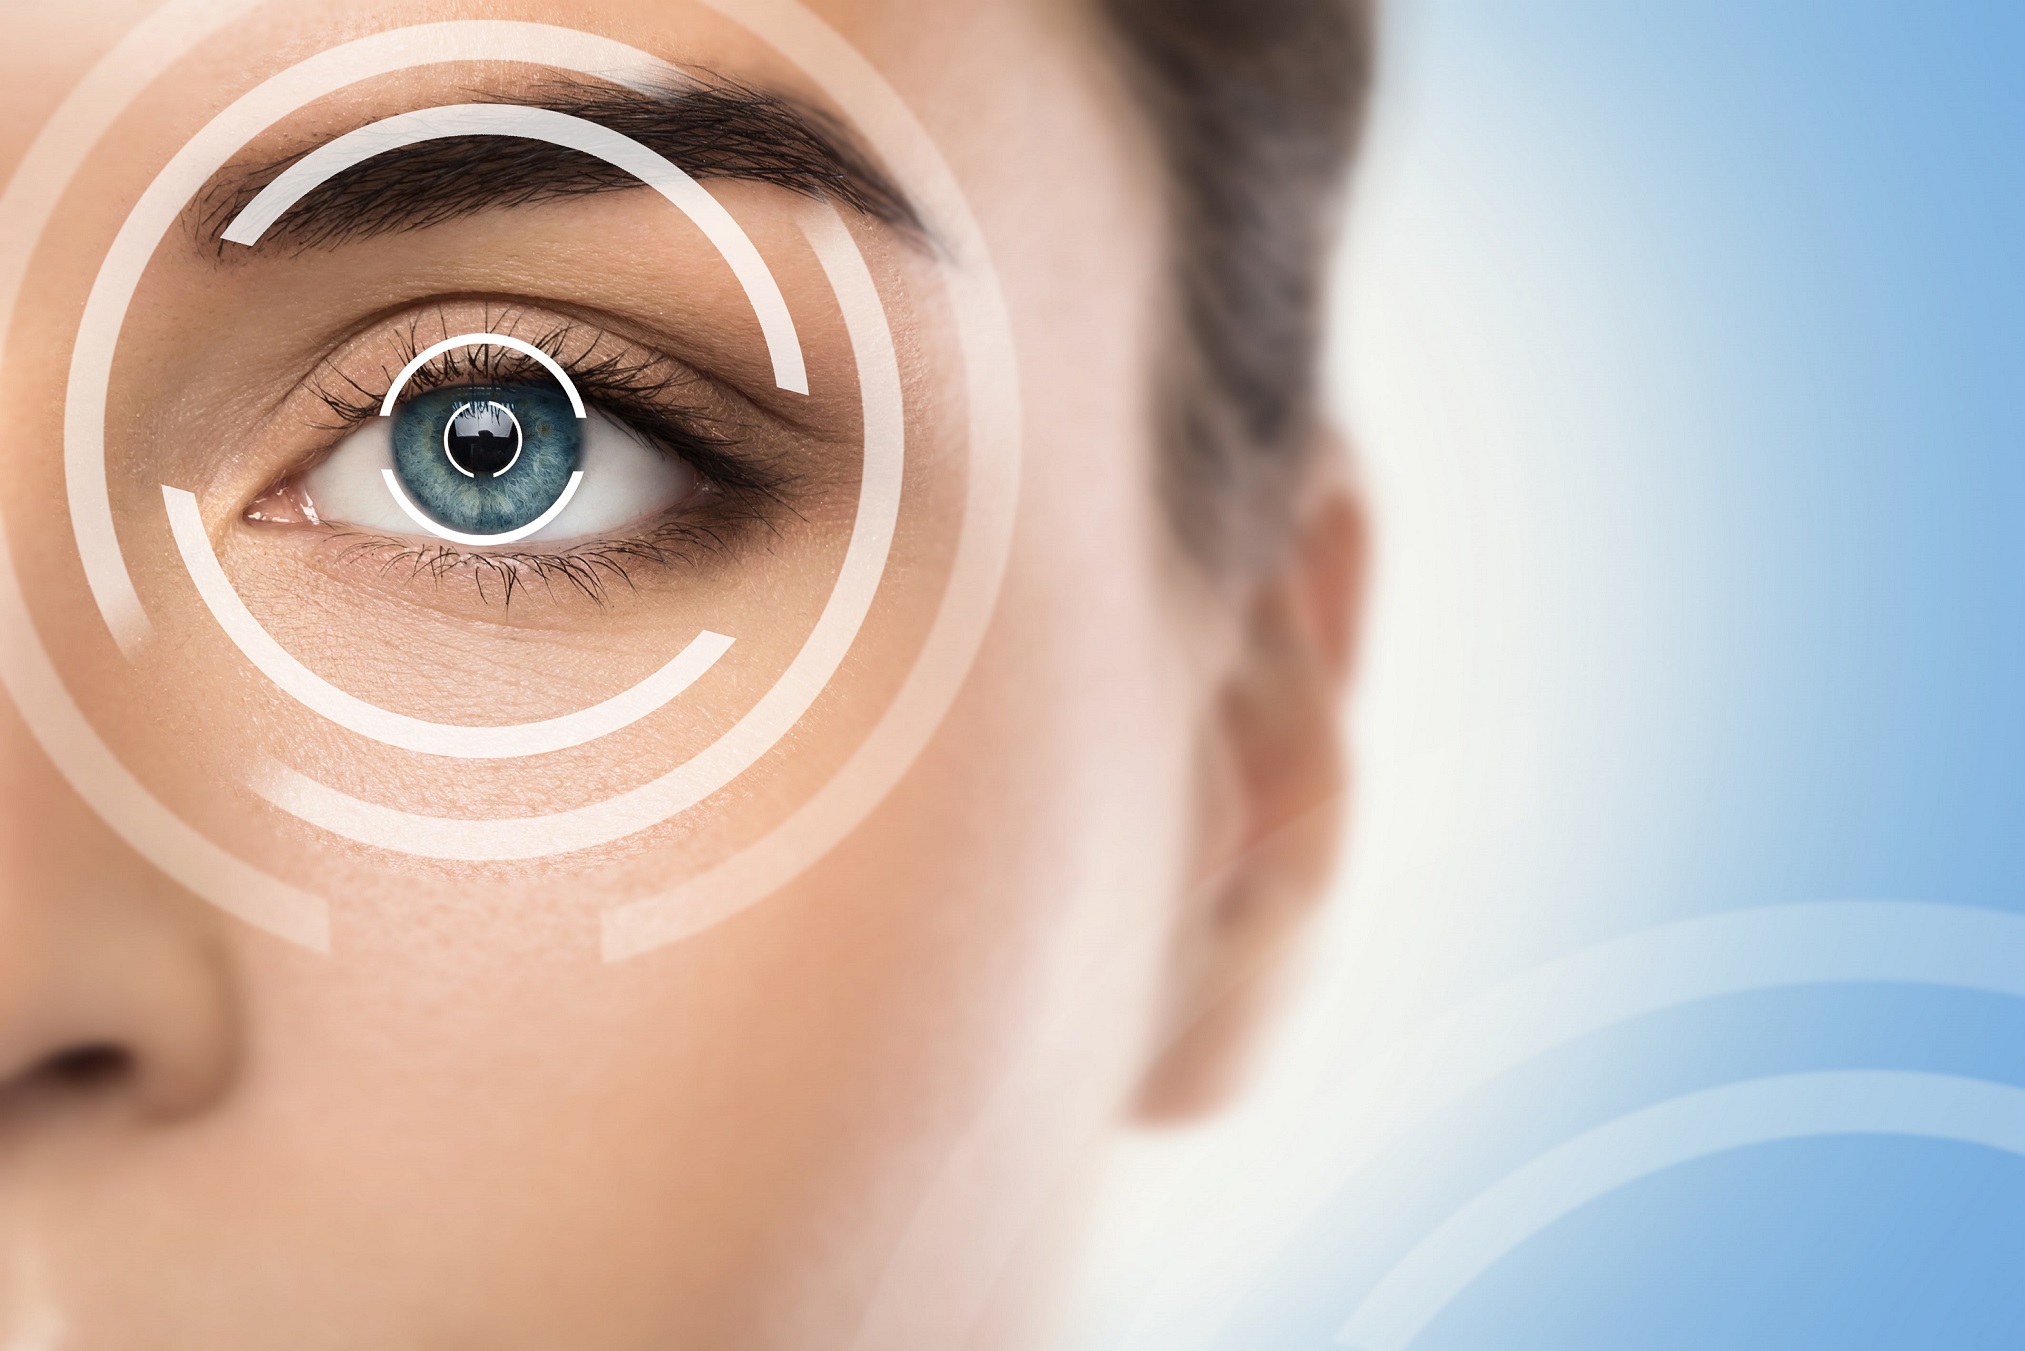 CAN DIET AFFECT YOUR EYESIGHT?